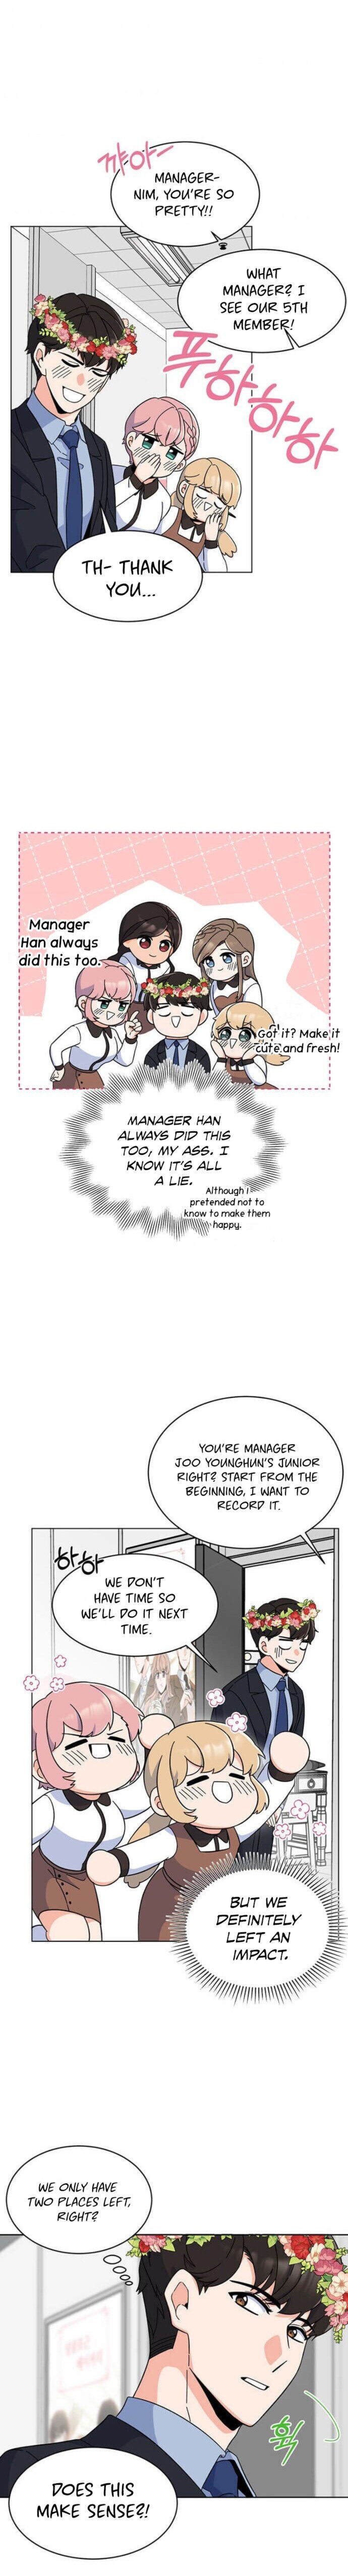 1st year Max Level Manager - Chapter 21 Page 8